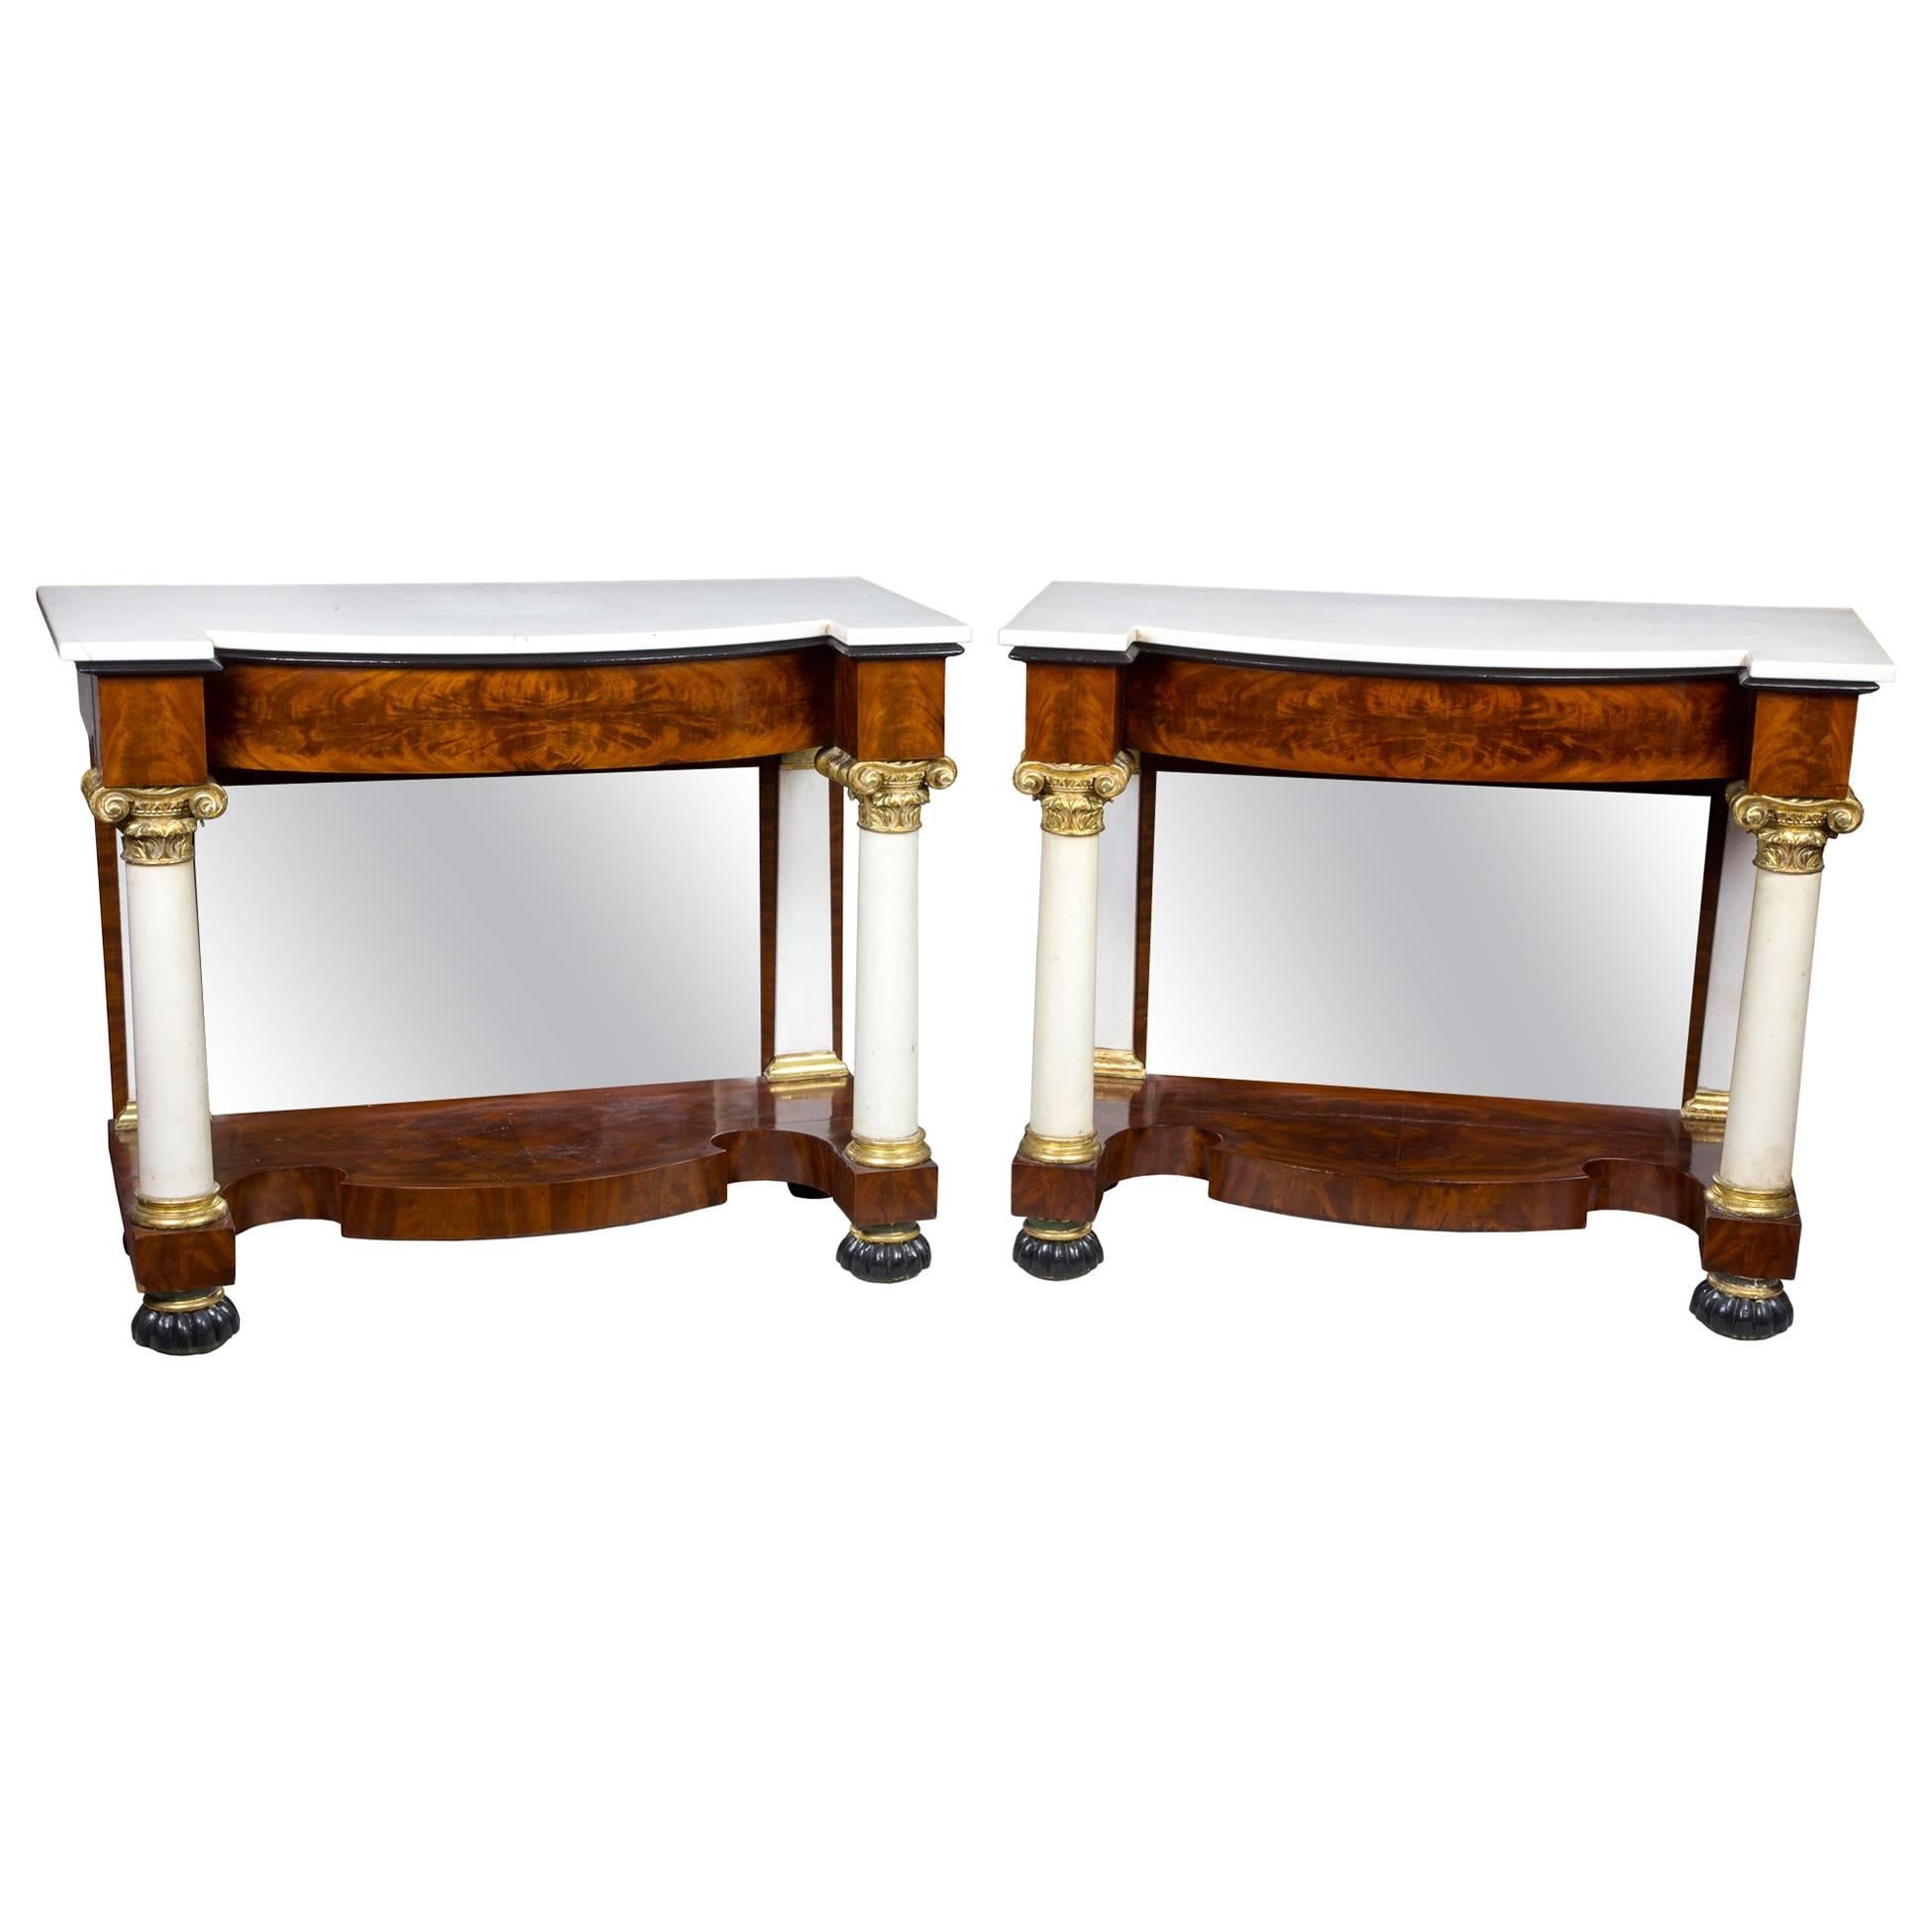 Pair of Mahogany and Marble Classical Pier Tables